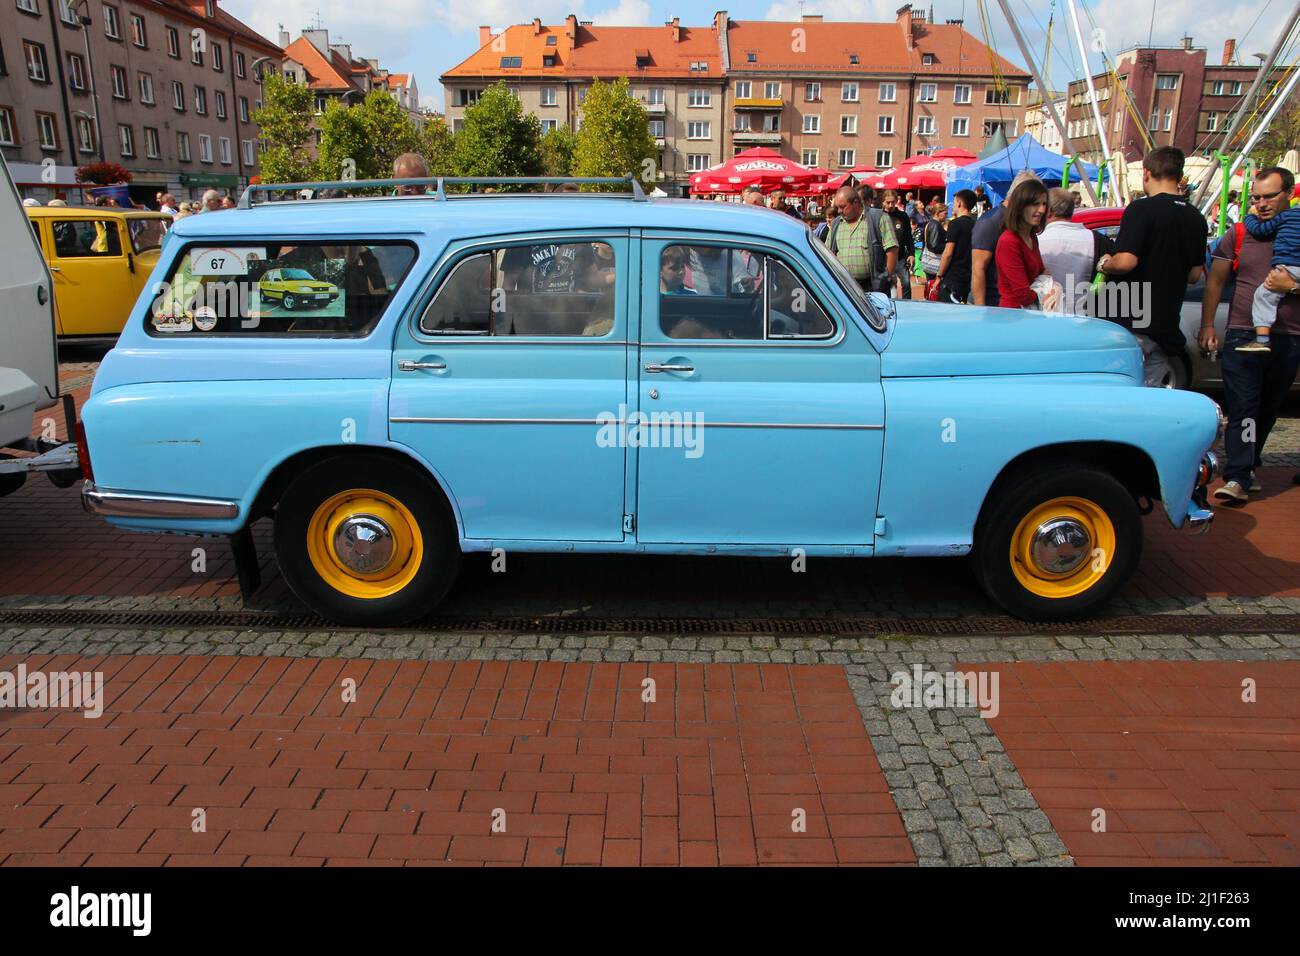 BYTOM, POLAND - SEPTEMBER 12, 2015: People walk by FSO Warszawa during 12th Historic Vehicle Rally in Bytom. The annual vehicle parade is one of main Stock Photo